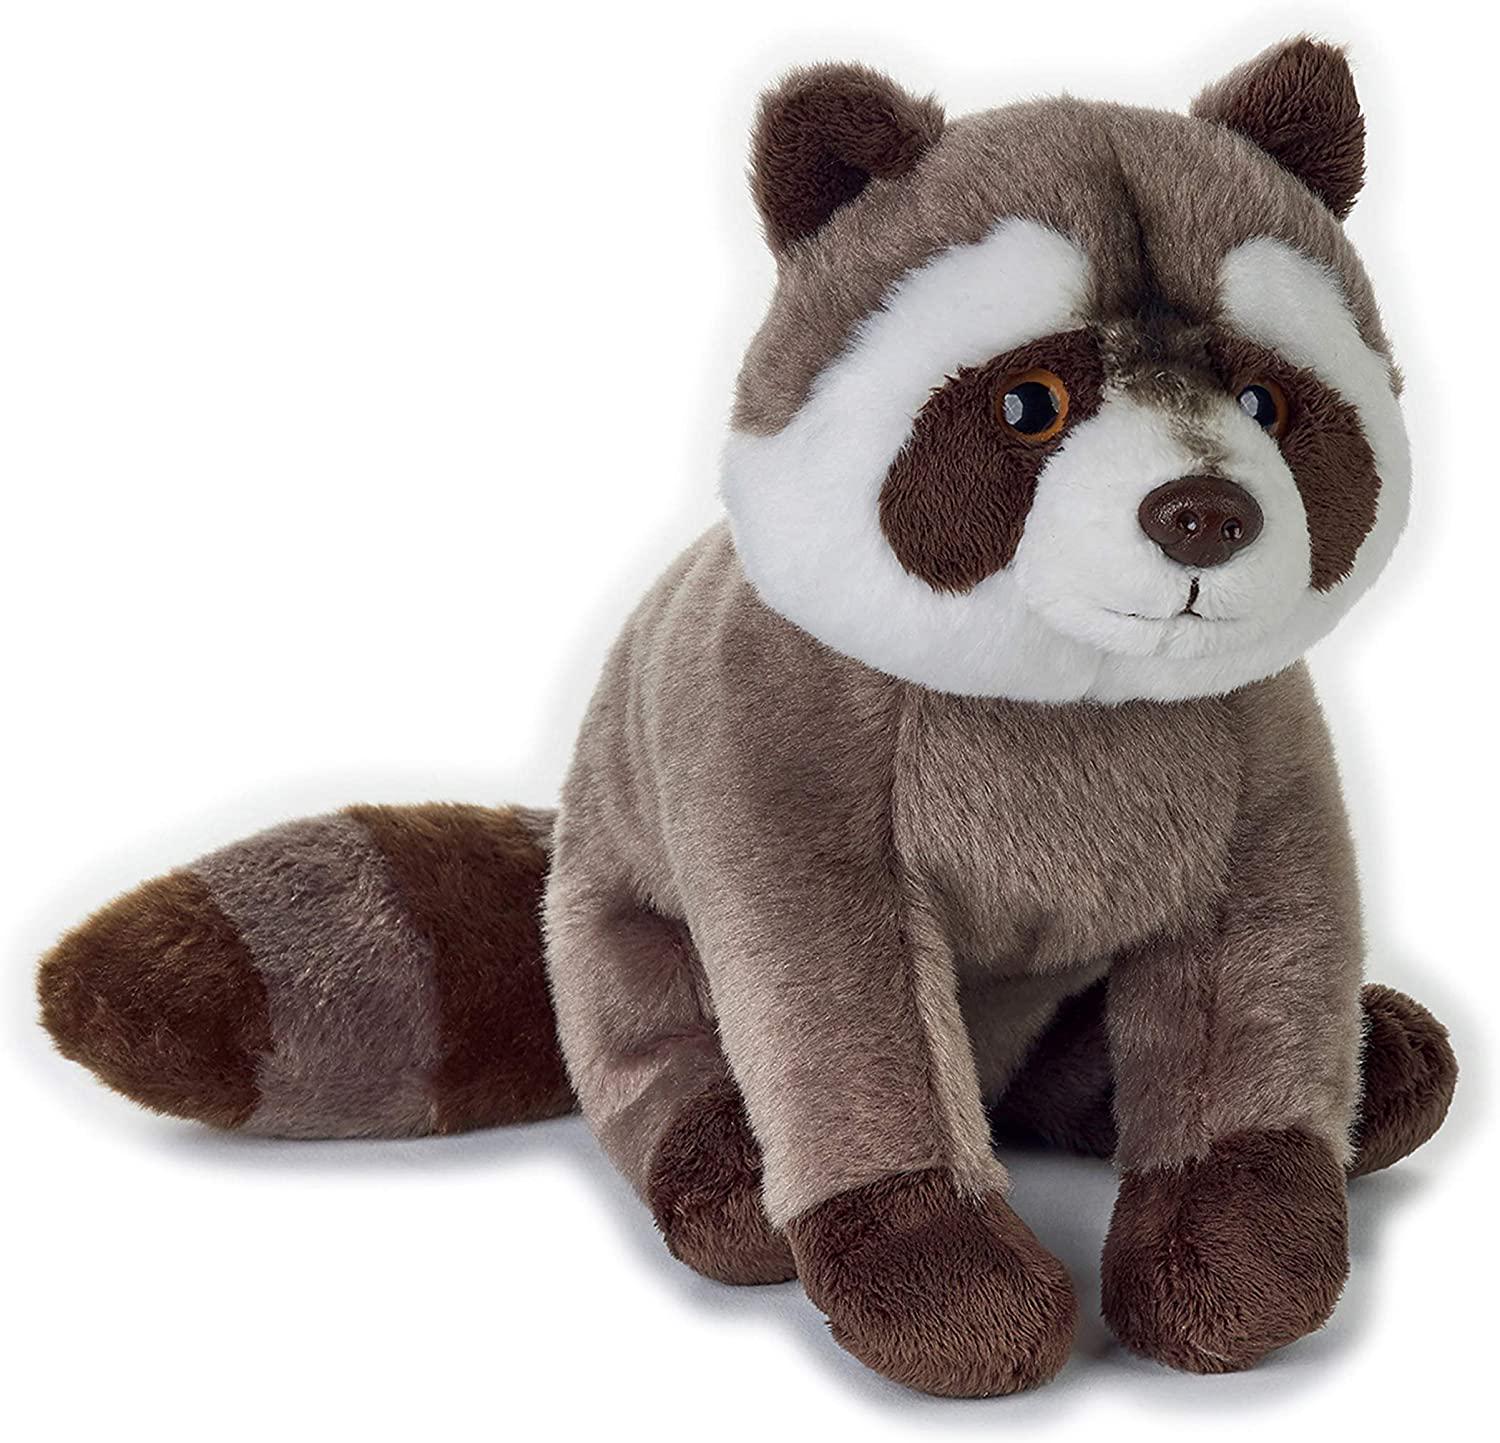 Venturelli, Lelly - National Geographic Basic Collection Plush, Raccoon